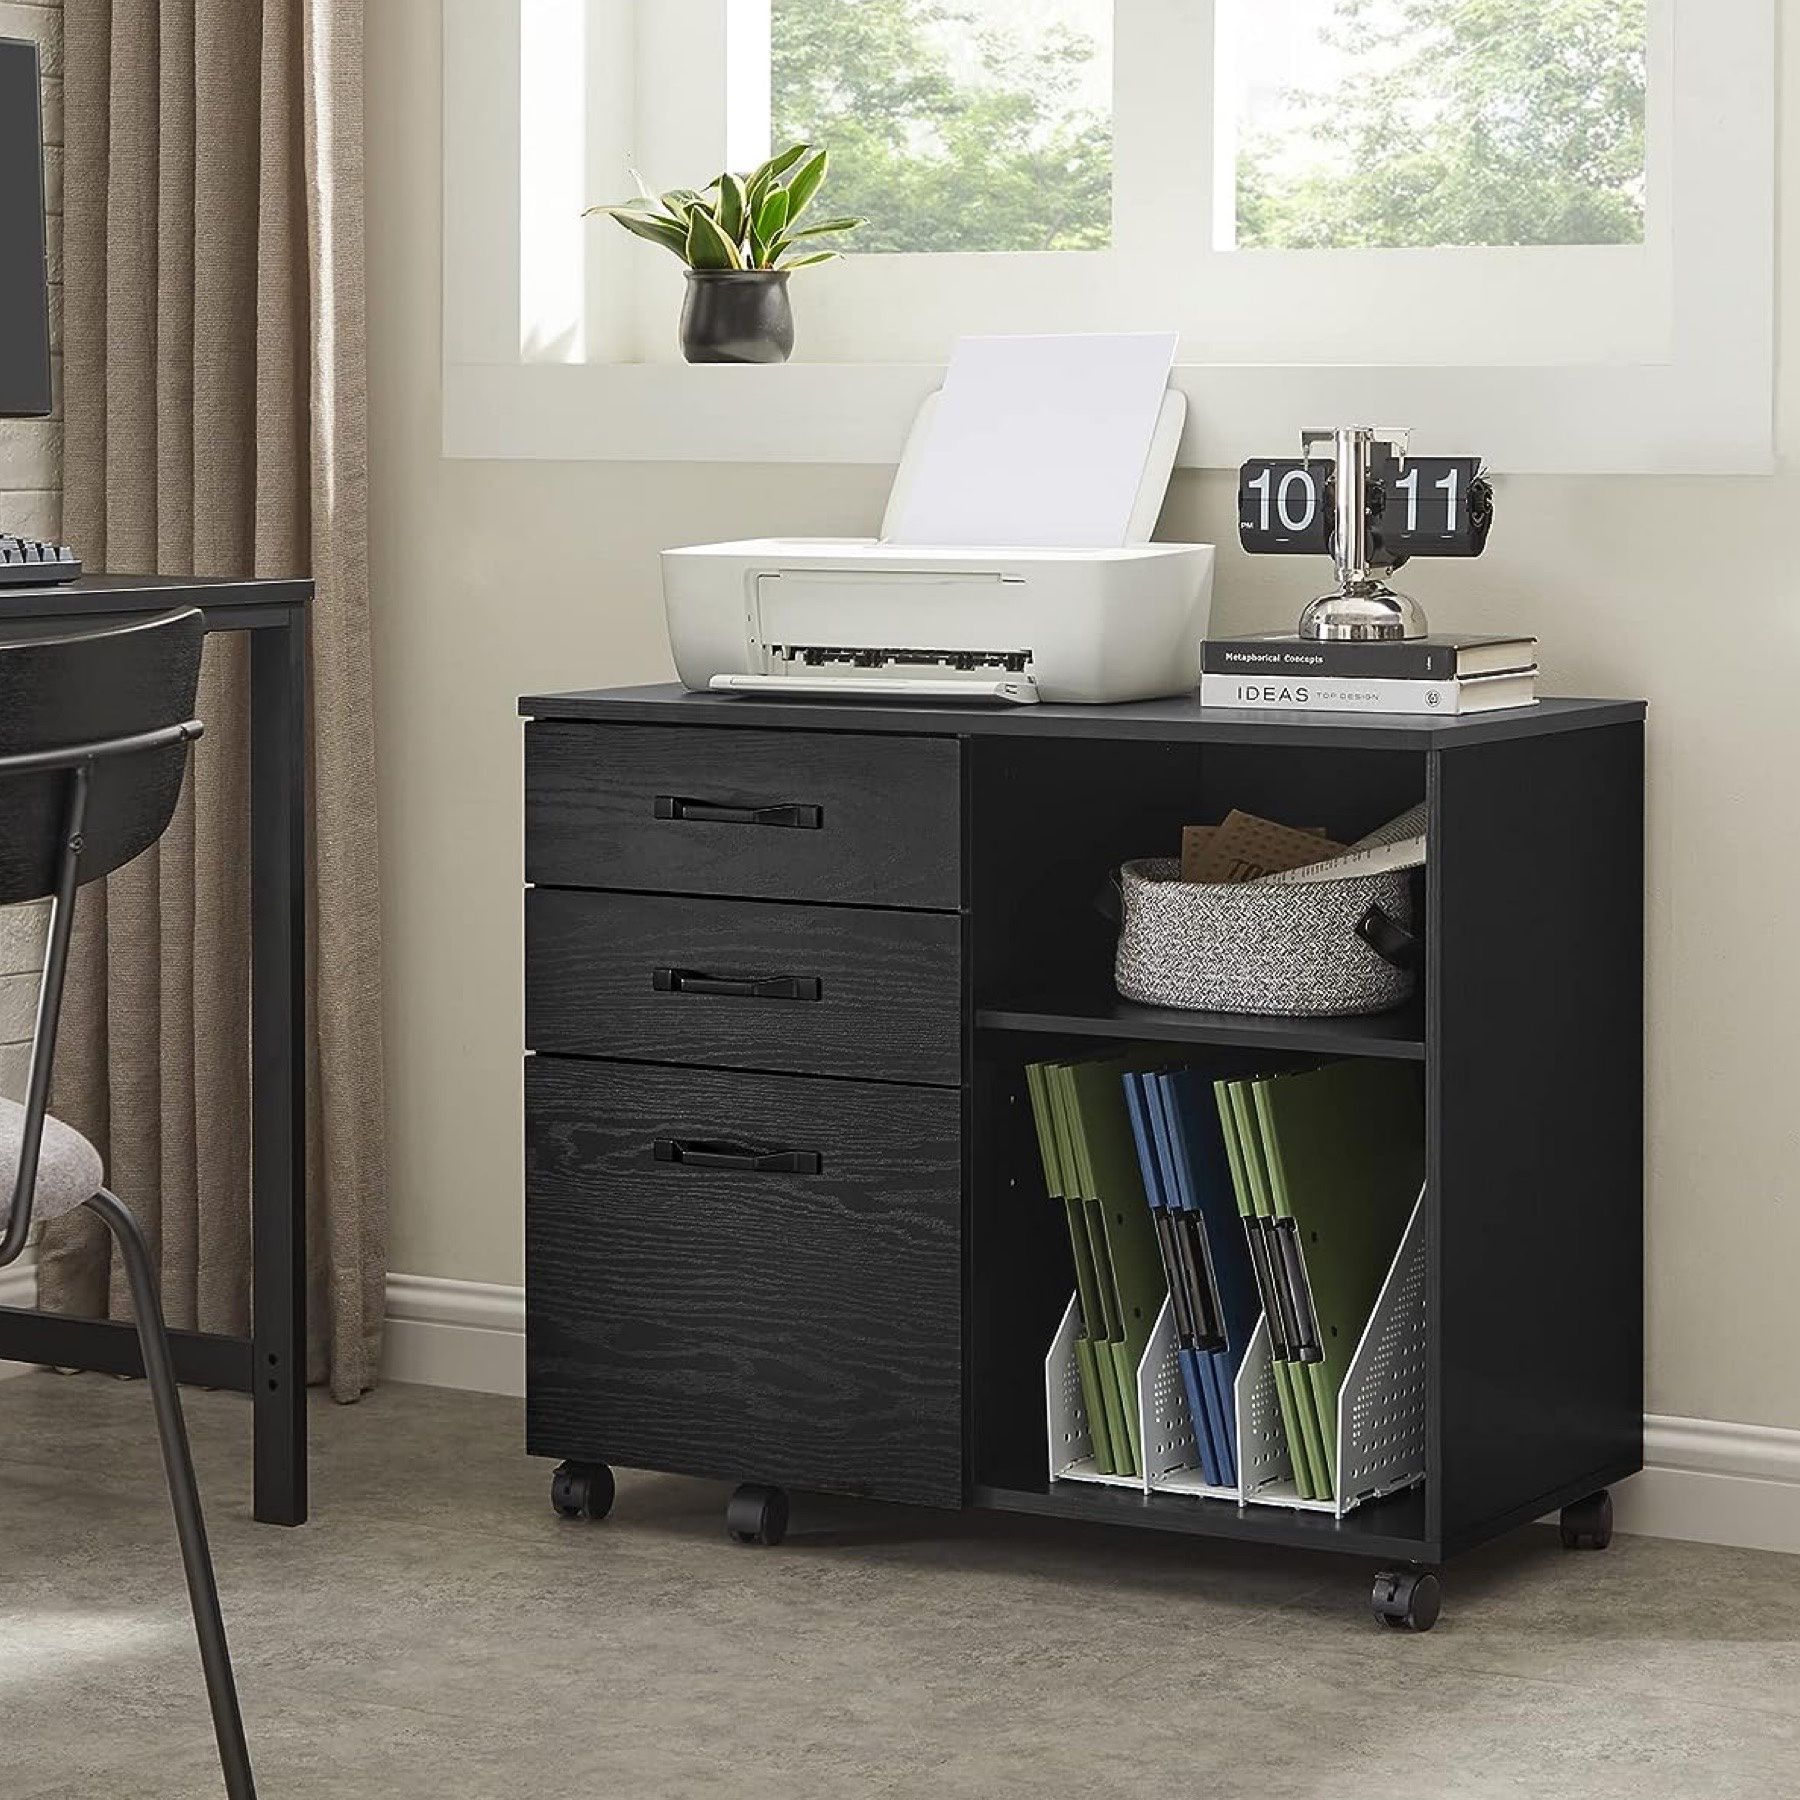 Lateral File Cabinet, Home Office Printer Stand, with 3 Drawers and Open Storage Shelves, for A4, Letter-Size Documents, Black with Wood Grain 